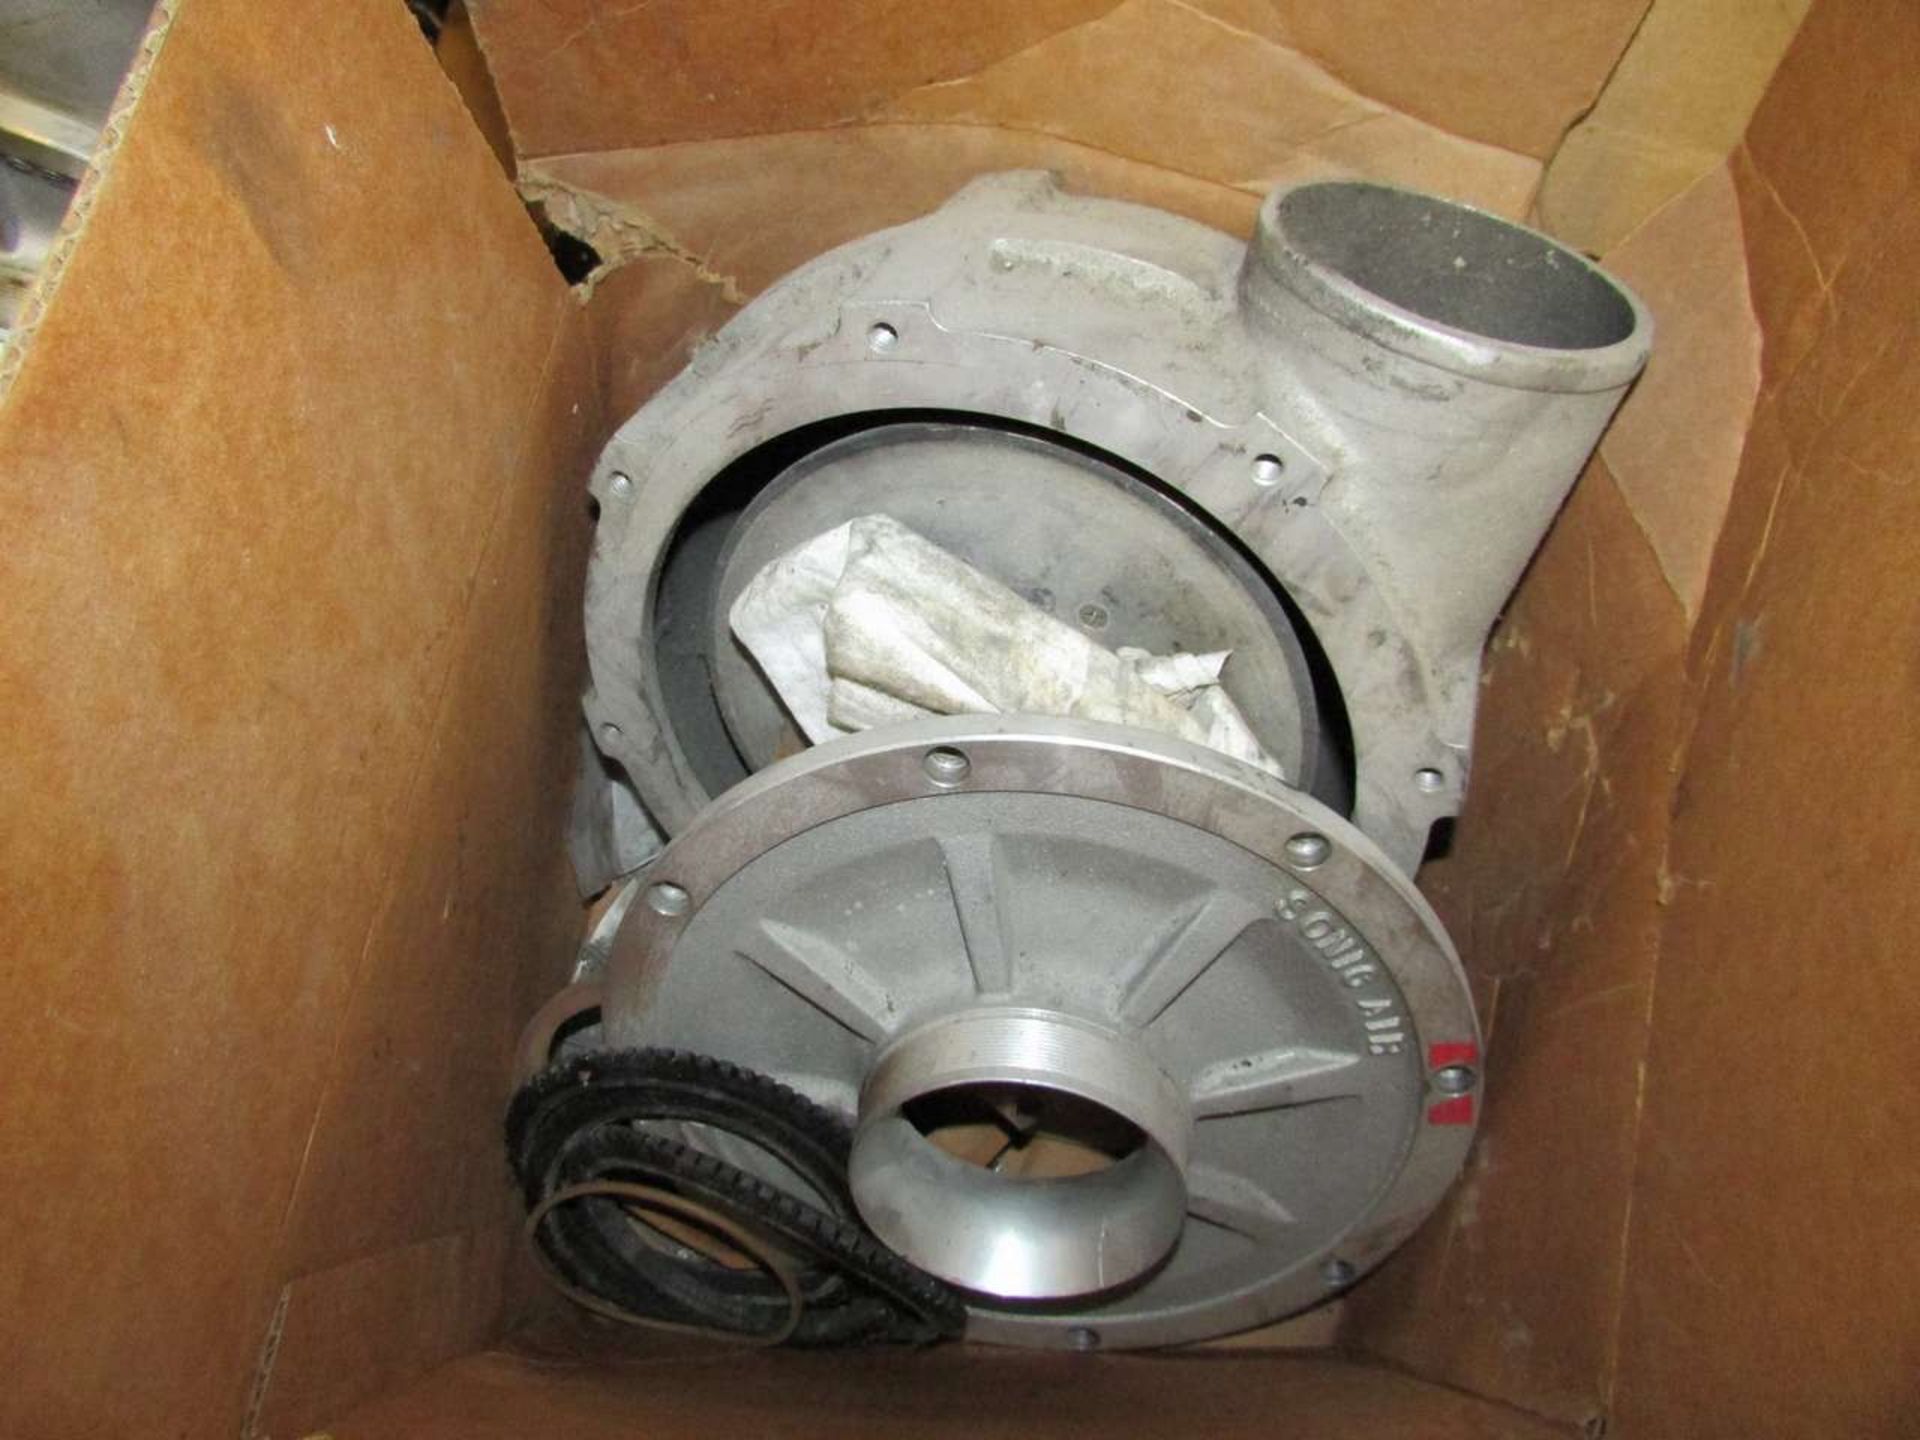 Sonic Air Systems Centrifugal Blower Heads, - Image 3 of 4